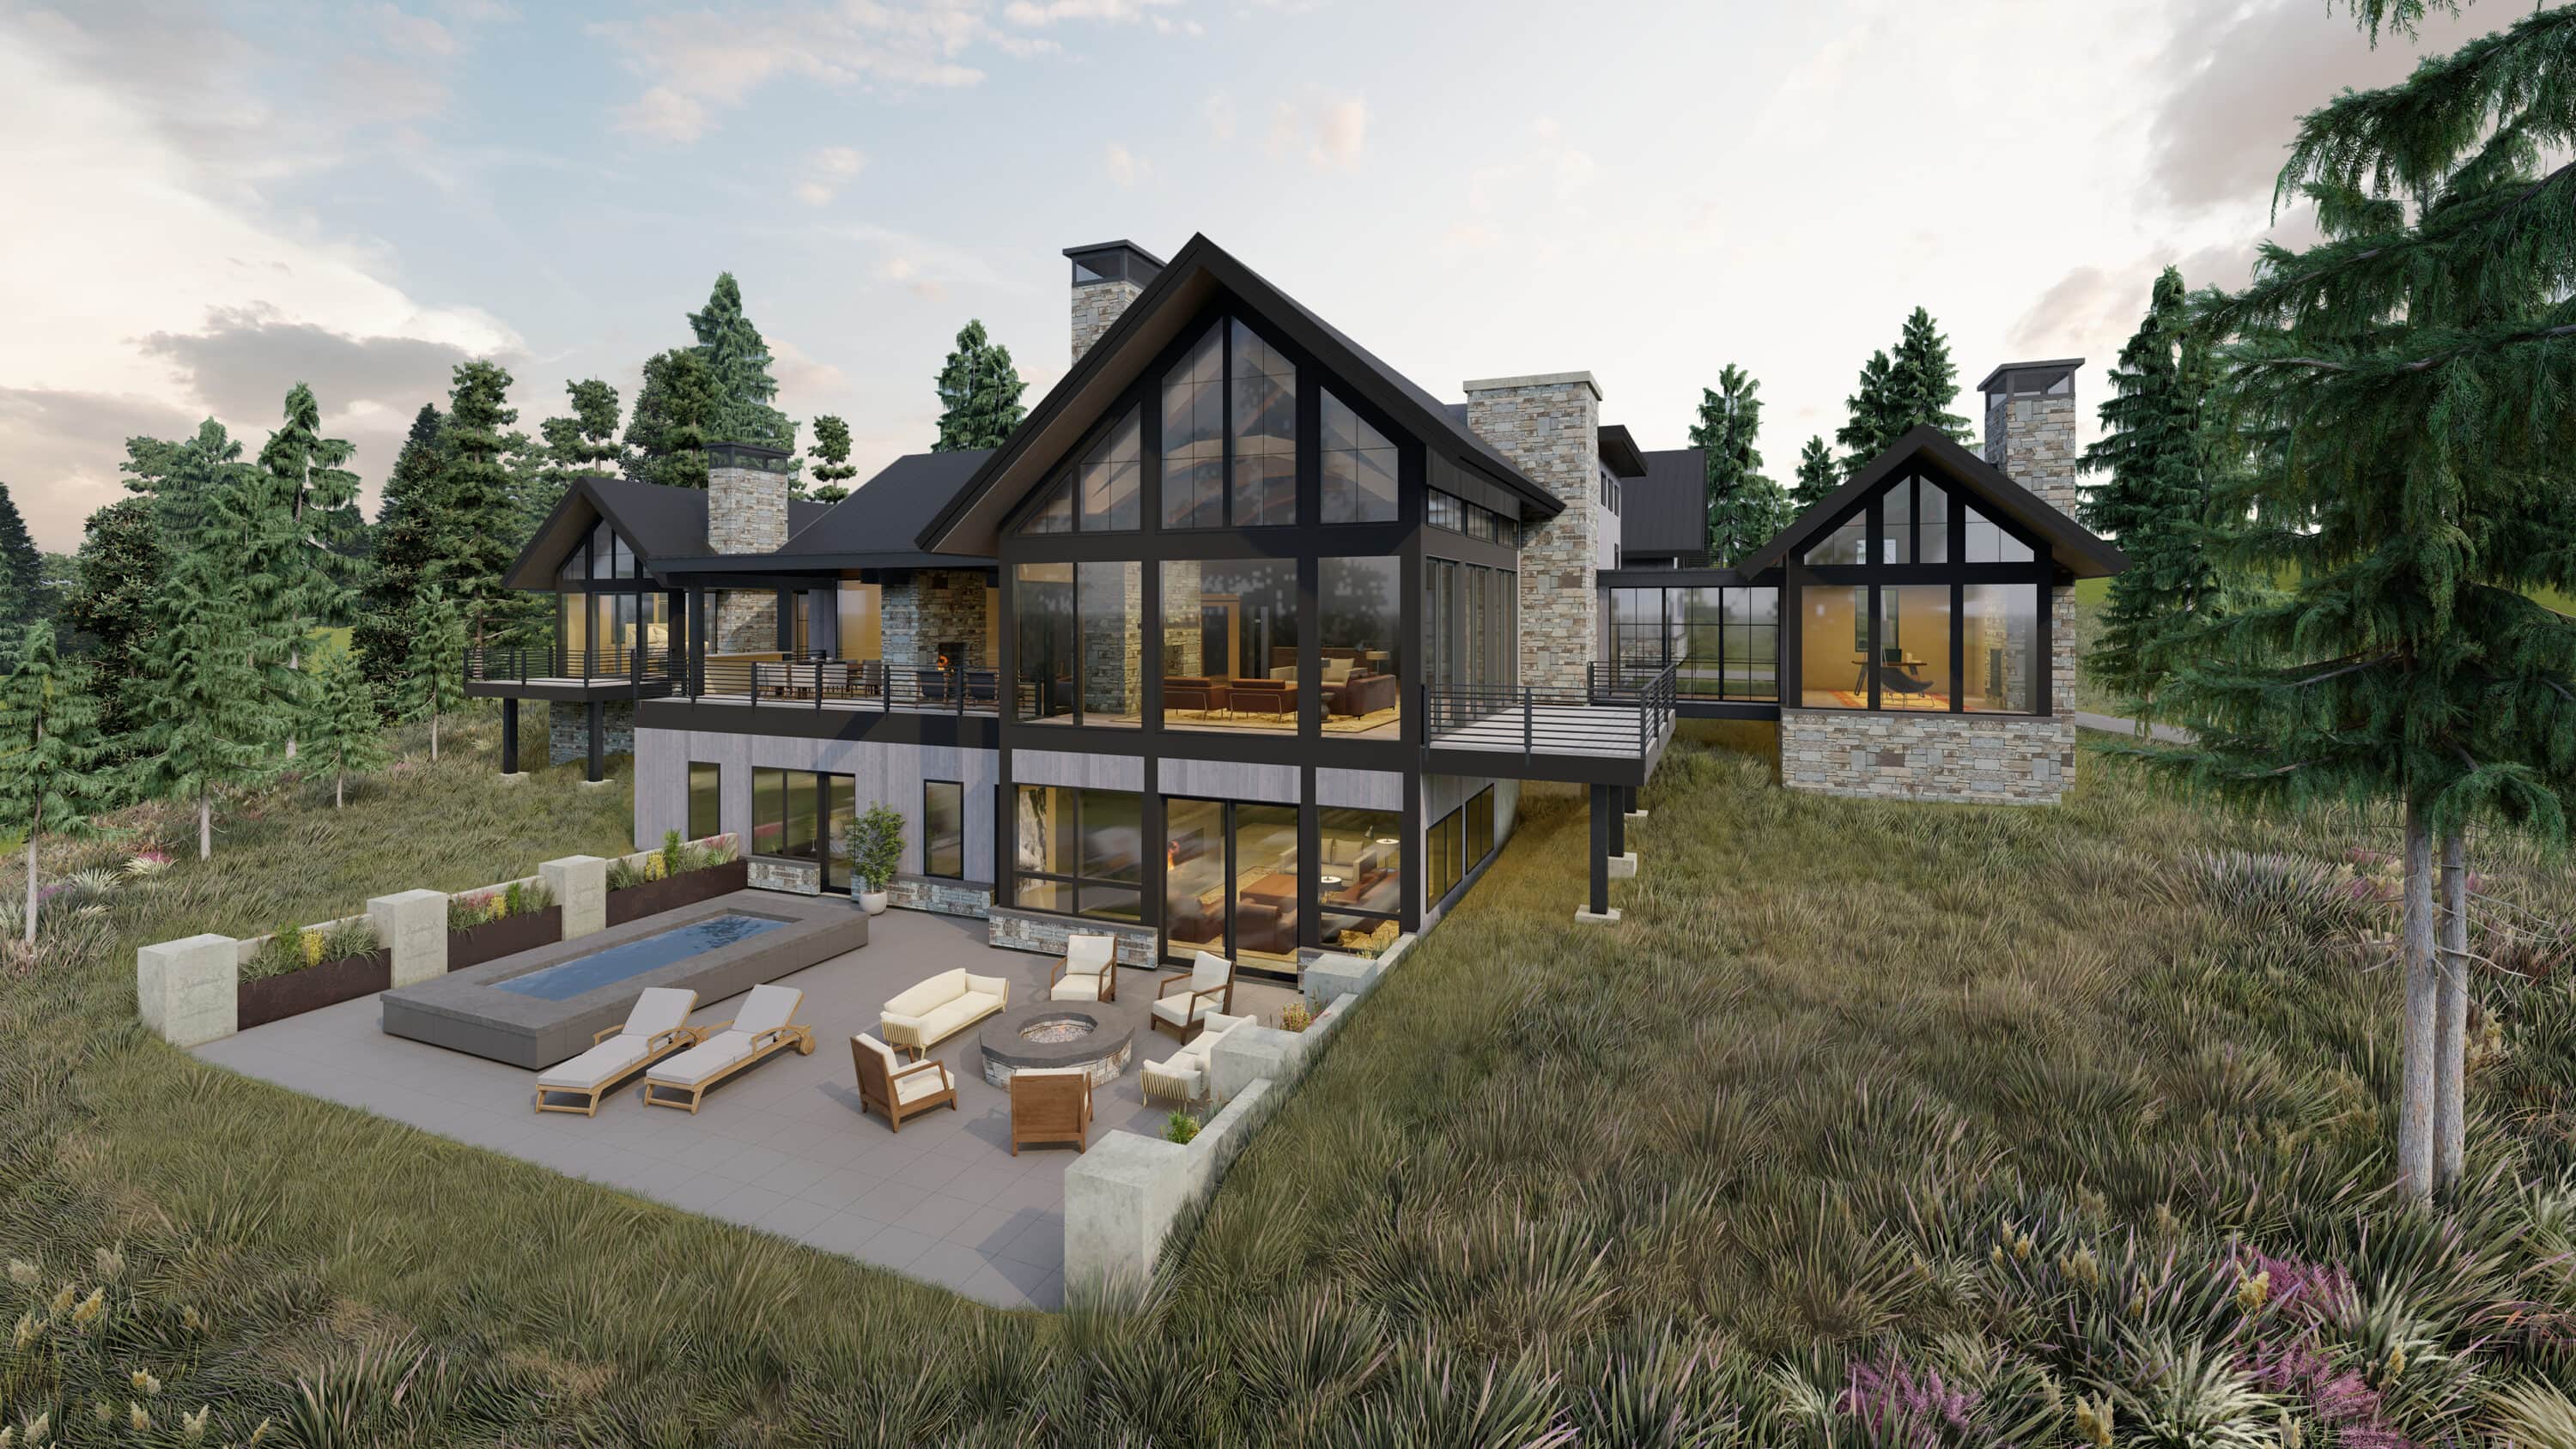 Big Sky Montana Refined Western Contemporary Residence designed by Stillwater Architecture